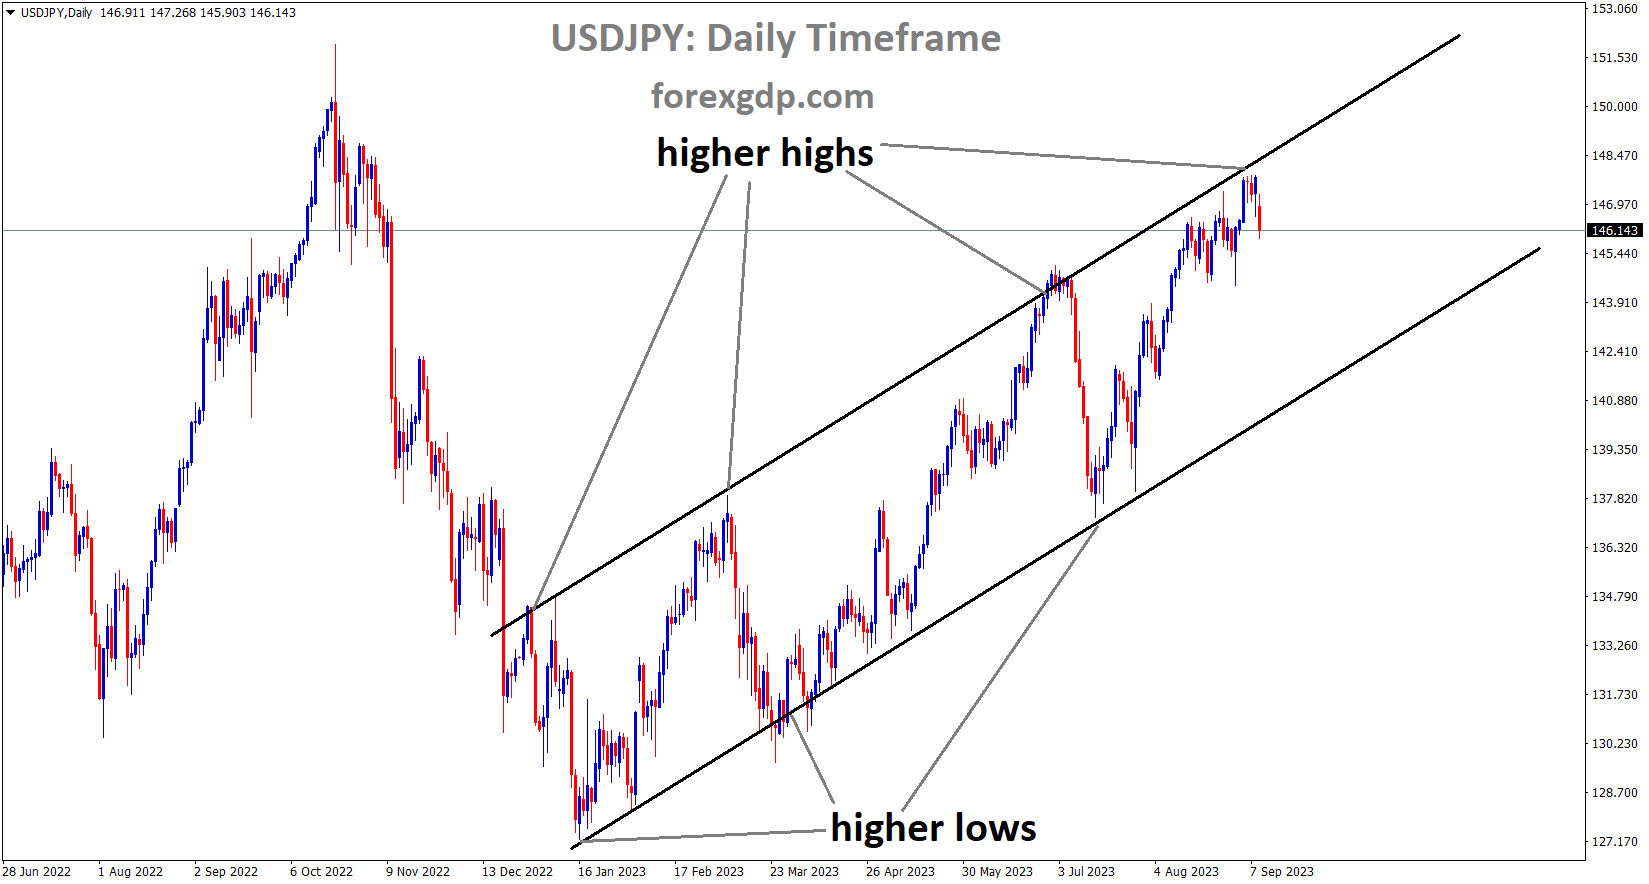 USDJPY is moving in an Ascending channel and the market has fallen from the higher high area of the channel